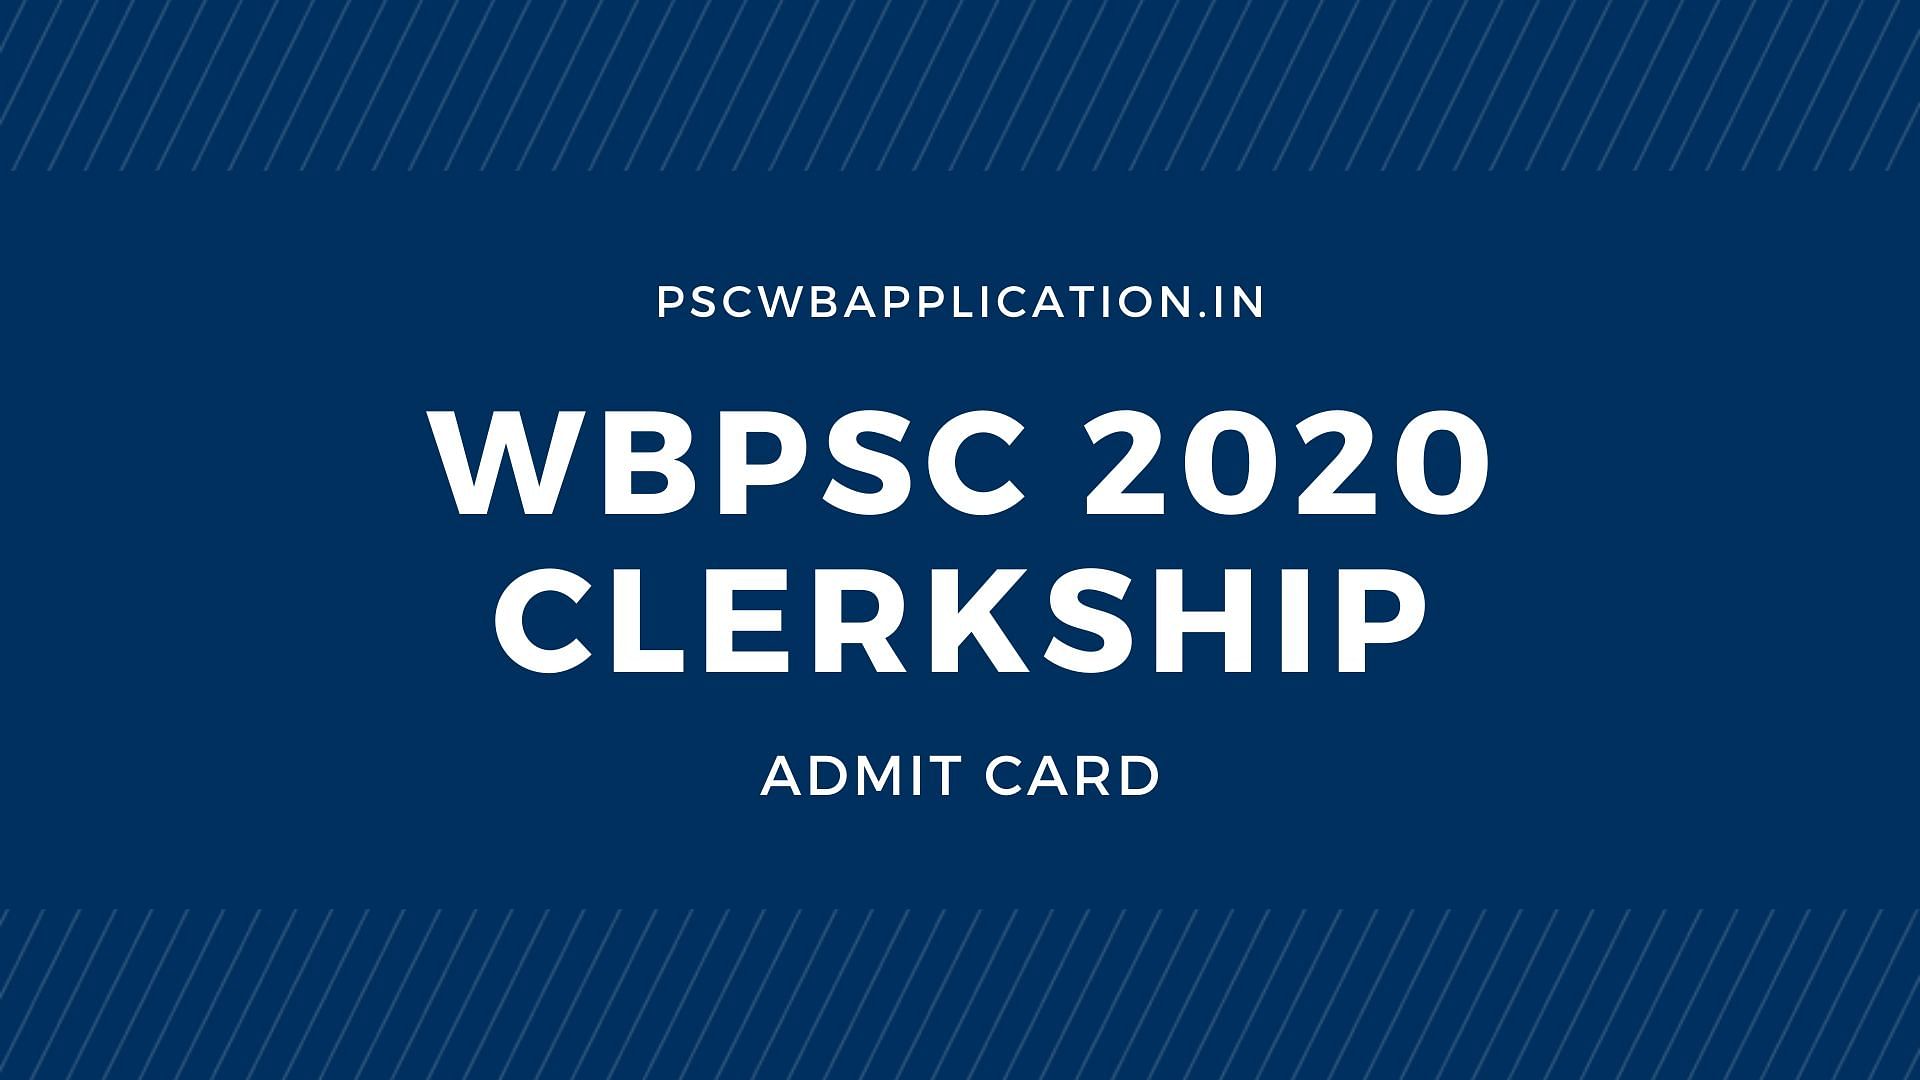 WBPSC Clerkship Admit Card 2020 to released today on 11 January 2020